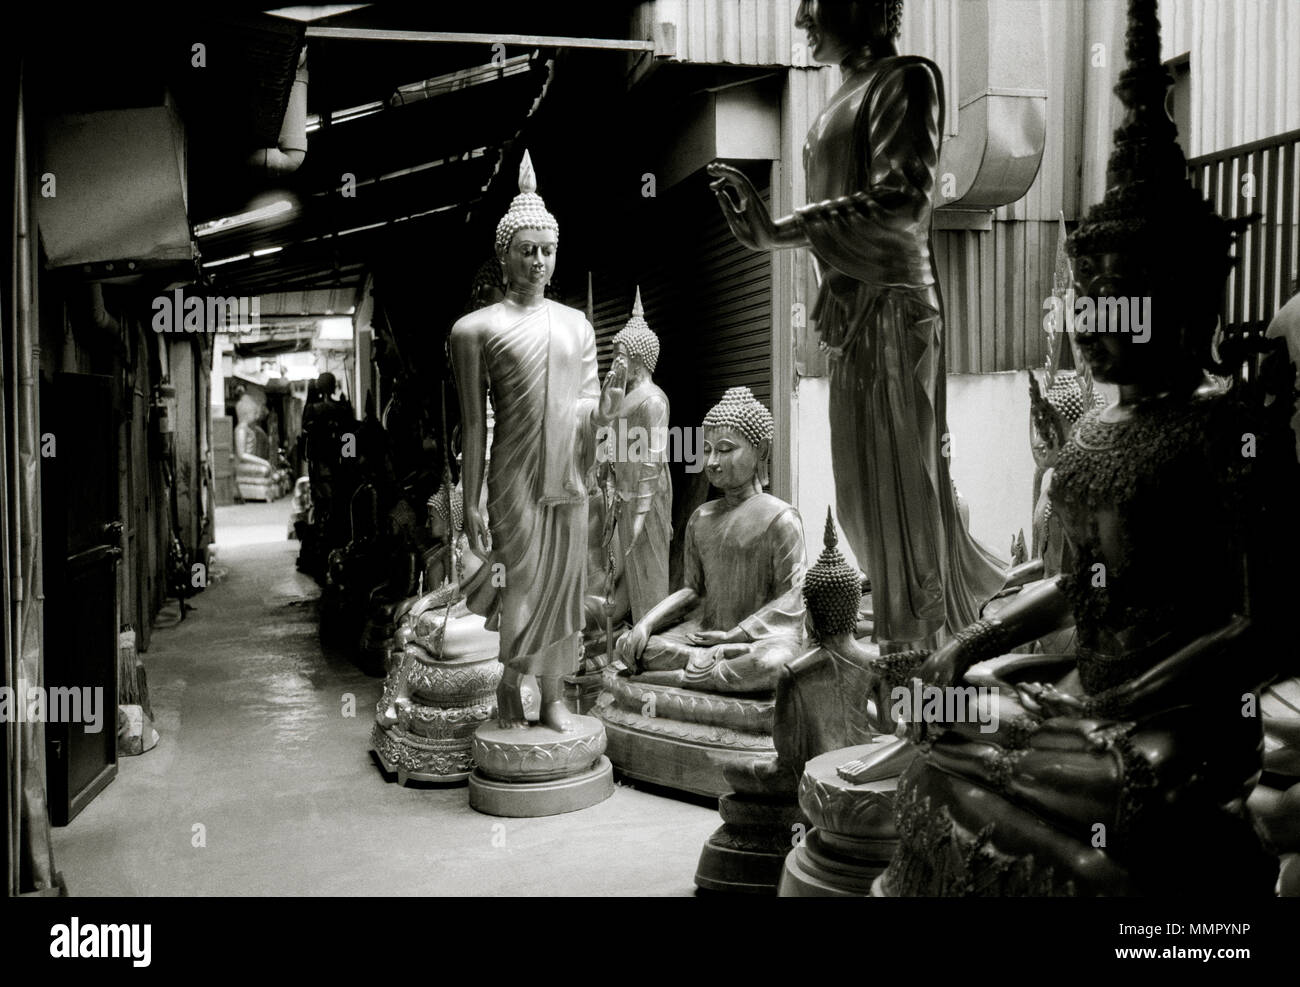 Religious Buddha carving statue art for sale in Bamrung Muang Road in Bangkok in Thailand Southeast Asia Far East. Buddhism Buddhist Religion Travel Stock Photo